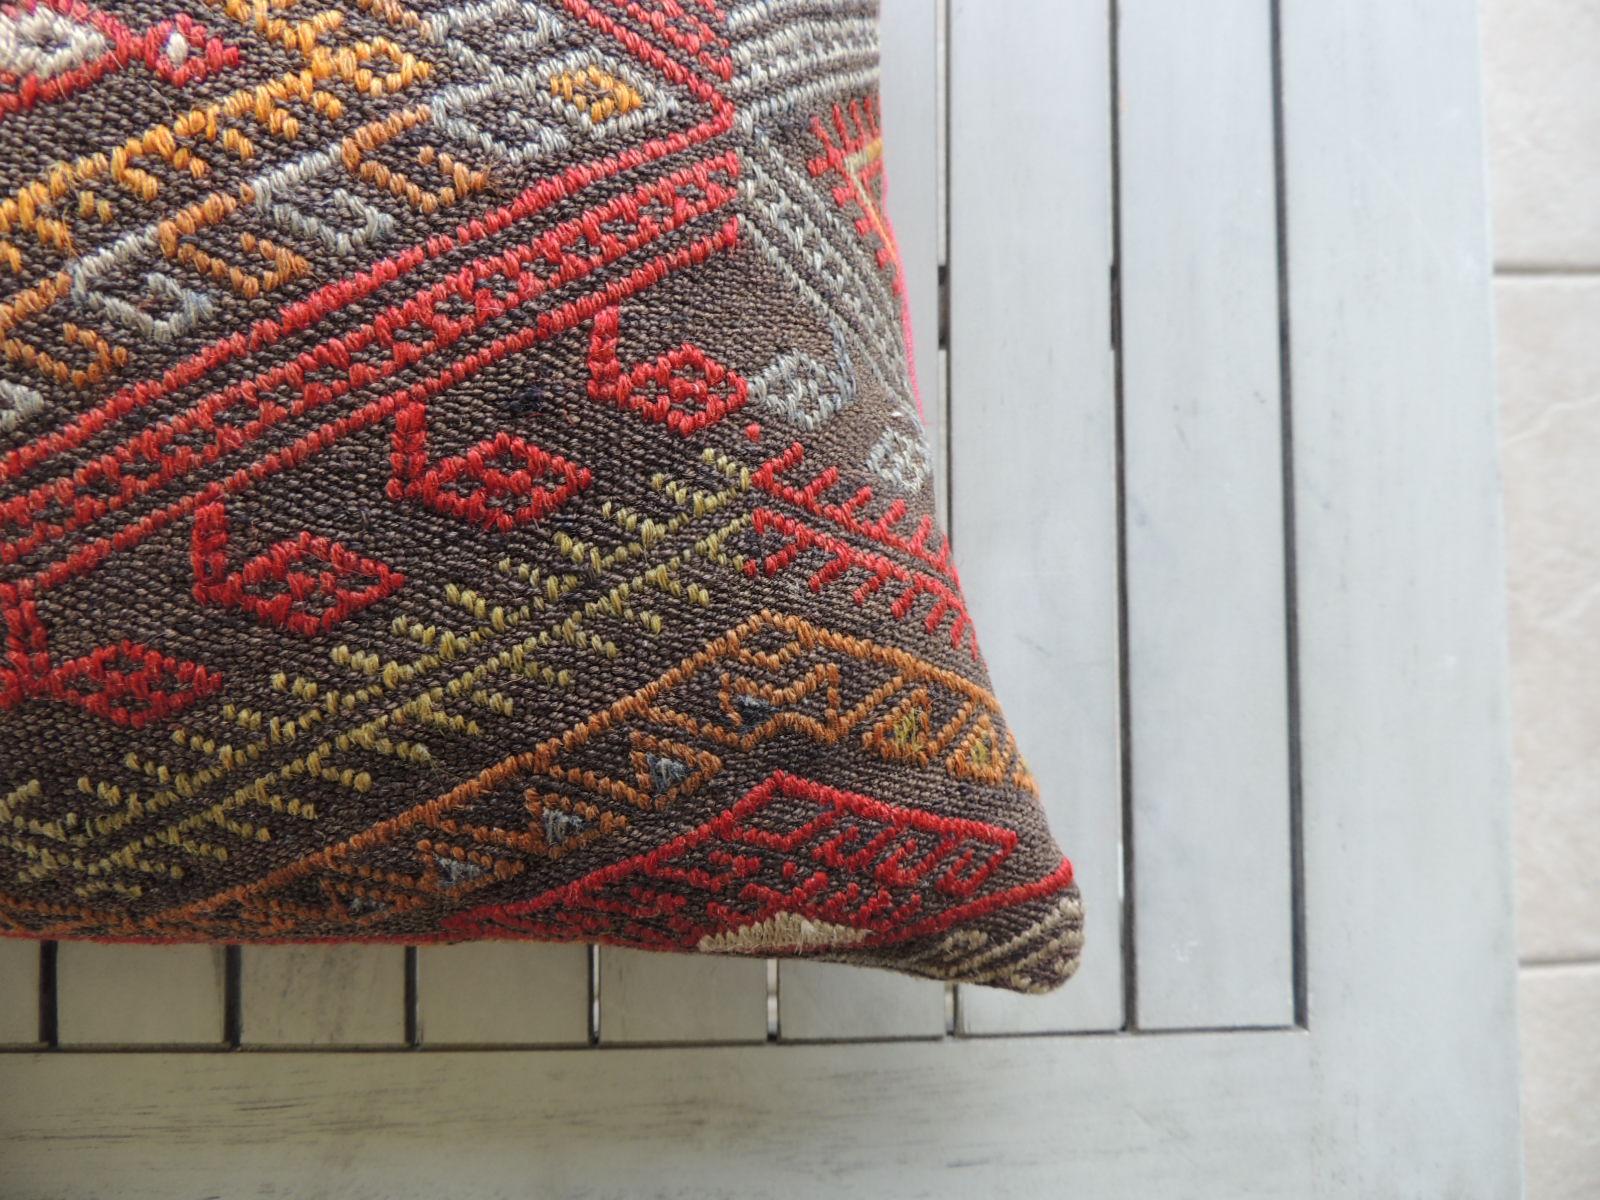 Hand-Crafted Vintage Red and Orange Woven Kilim Bolster Decorative Pillow